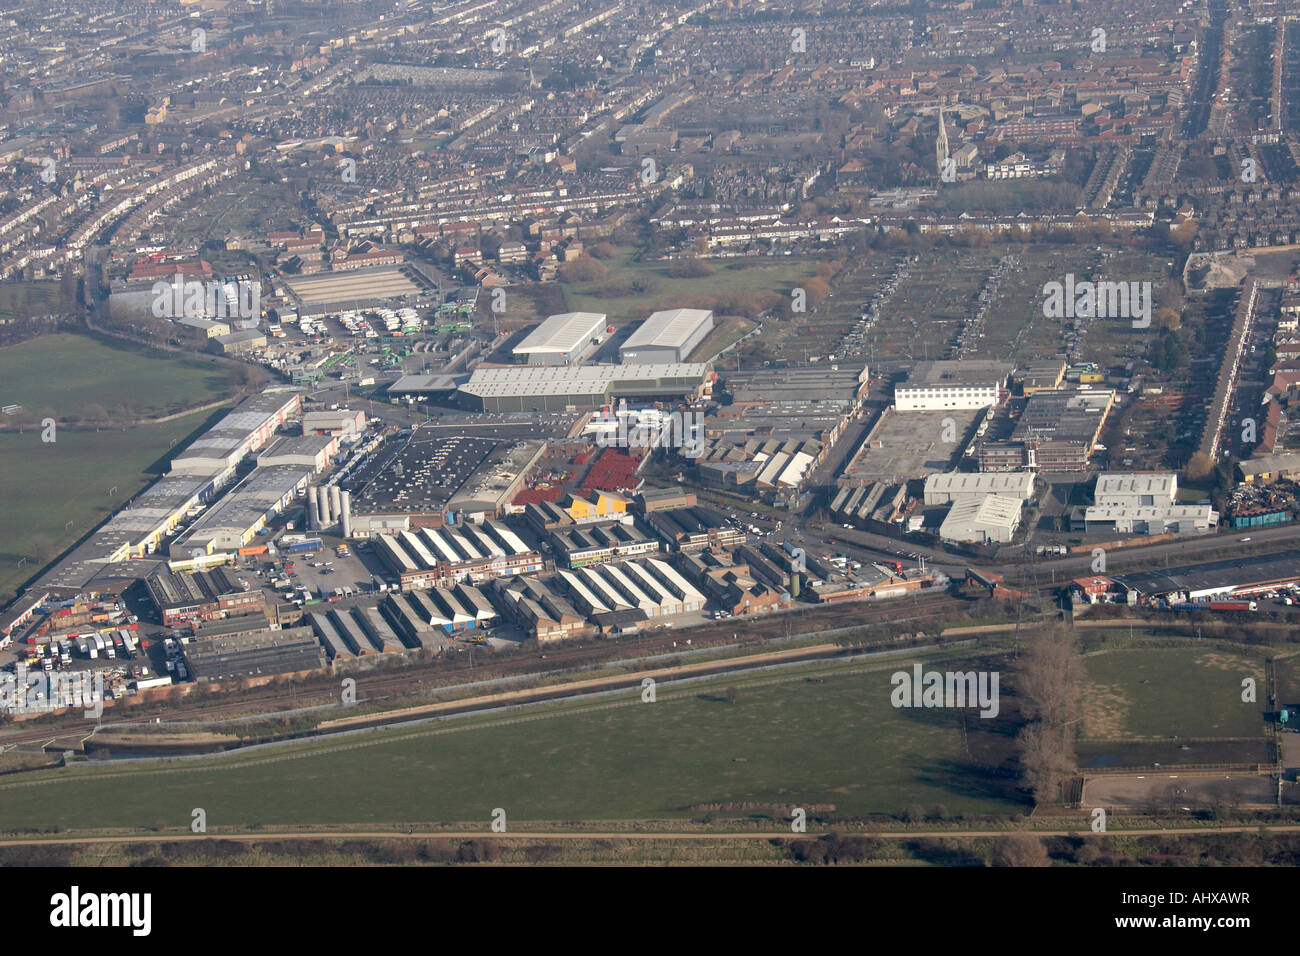 High level oblique aerial view east of Leyton Industrial works London E17 England UK January 2006 Stock Photo